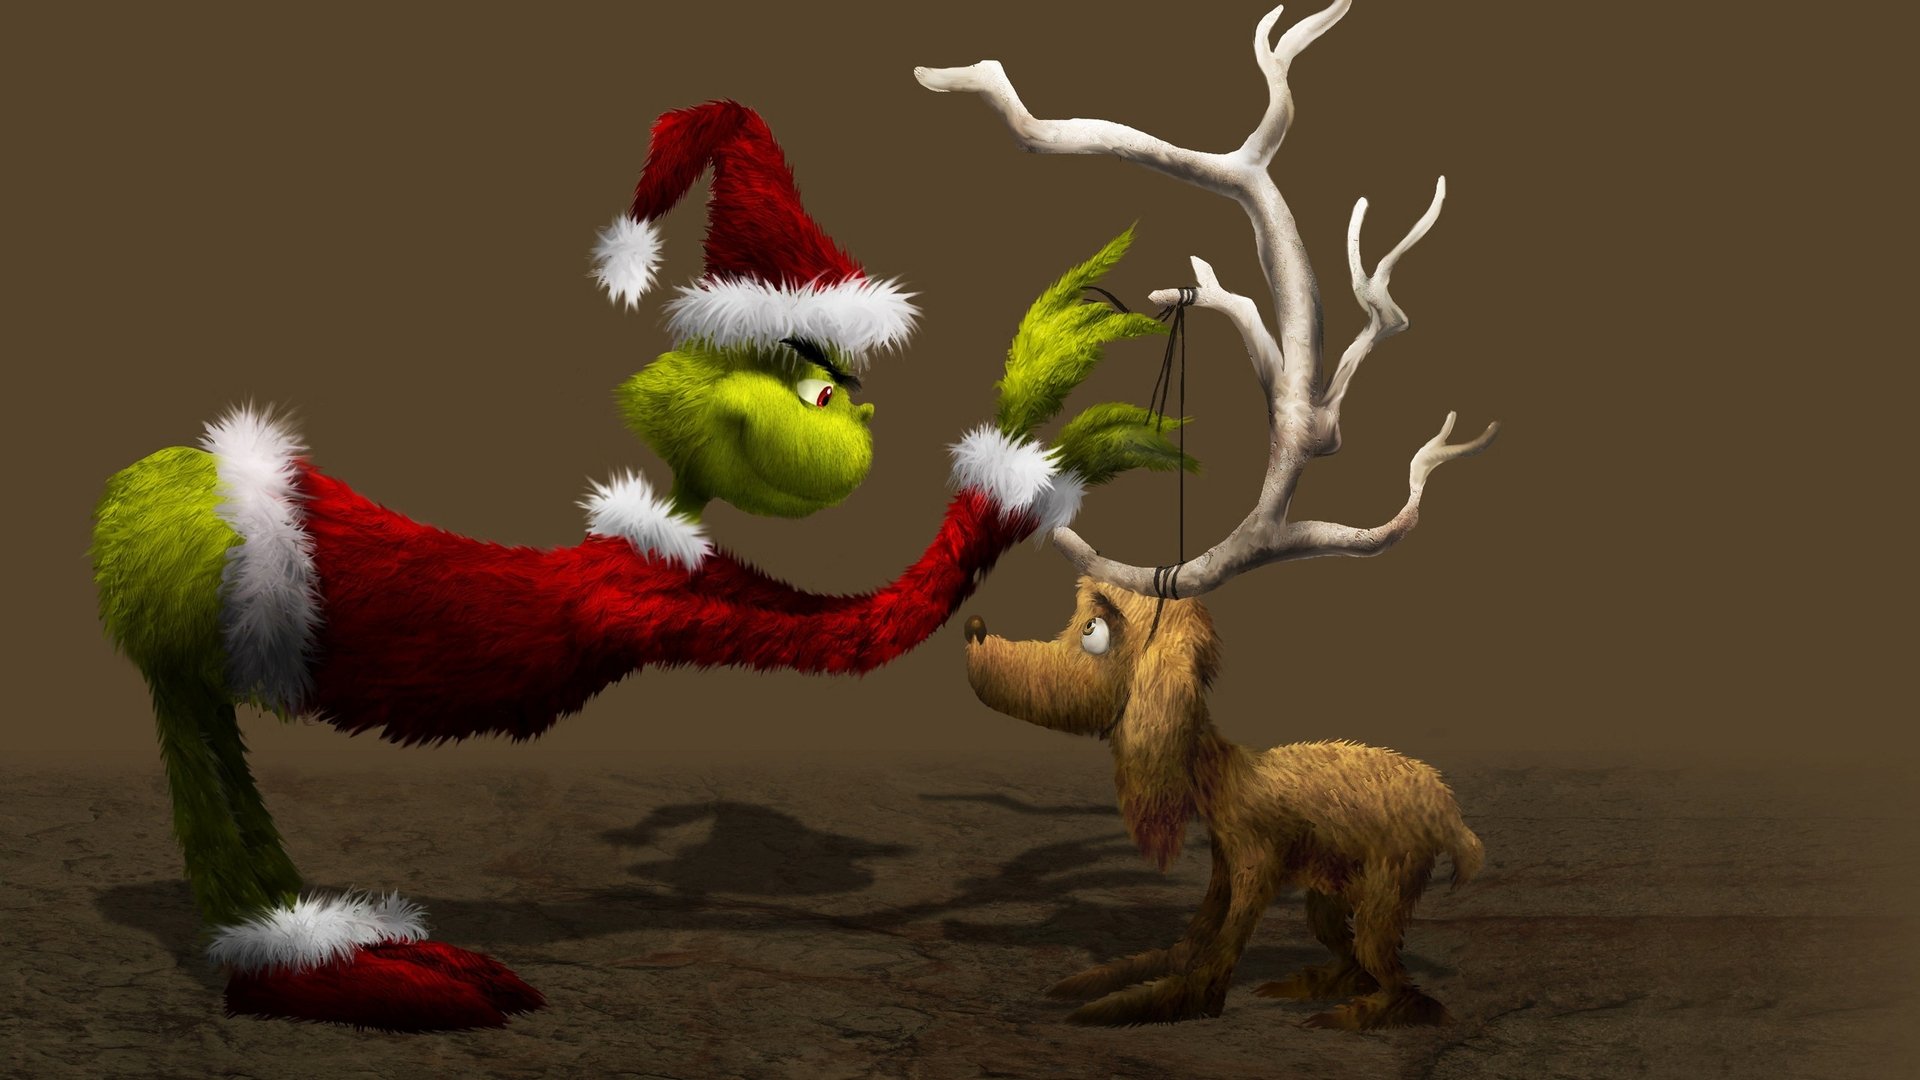 The Grinch 2018 Wallpapers